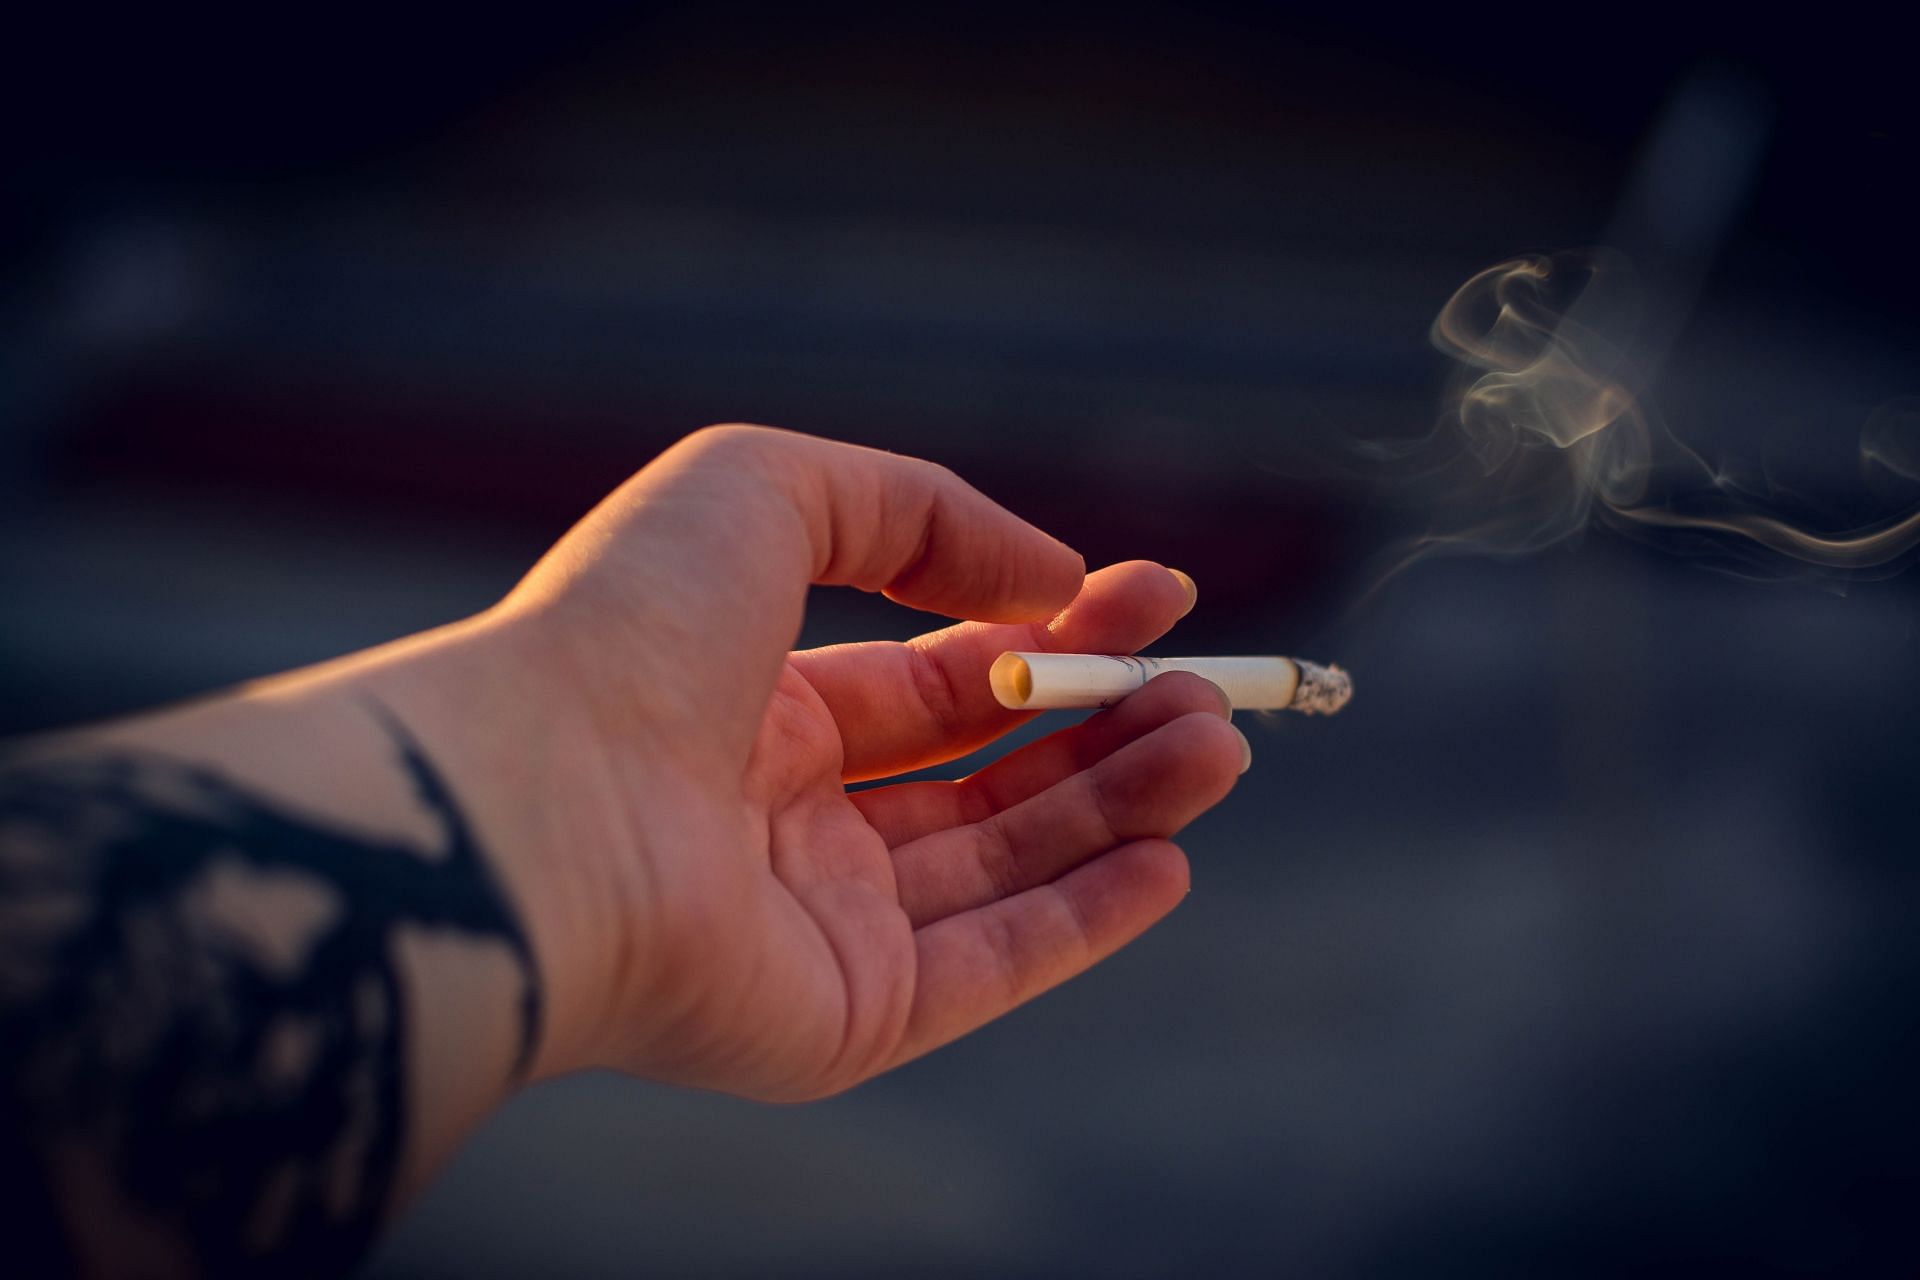 Smoking and tobacco use can cause staining on the teeth, making them more susceptible to decay (Image via Pexels)